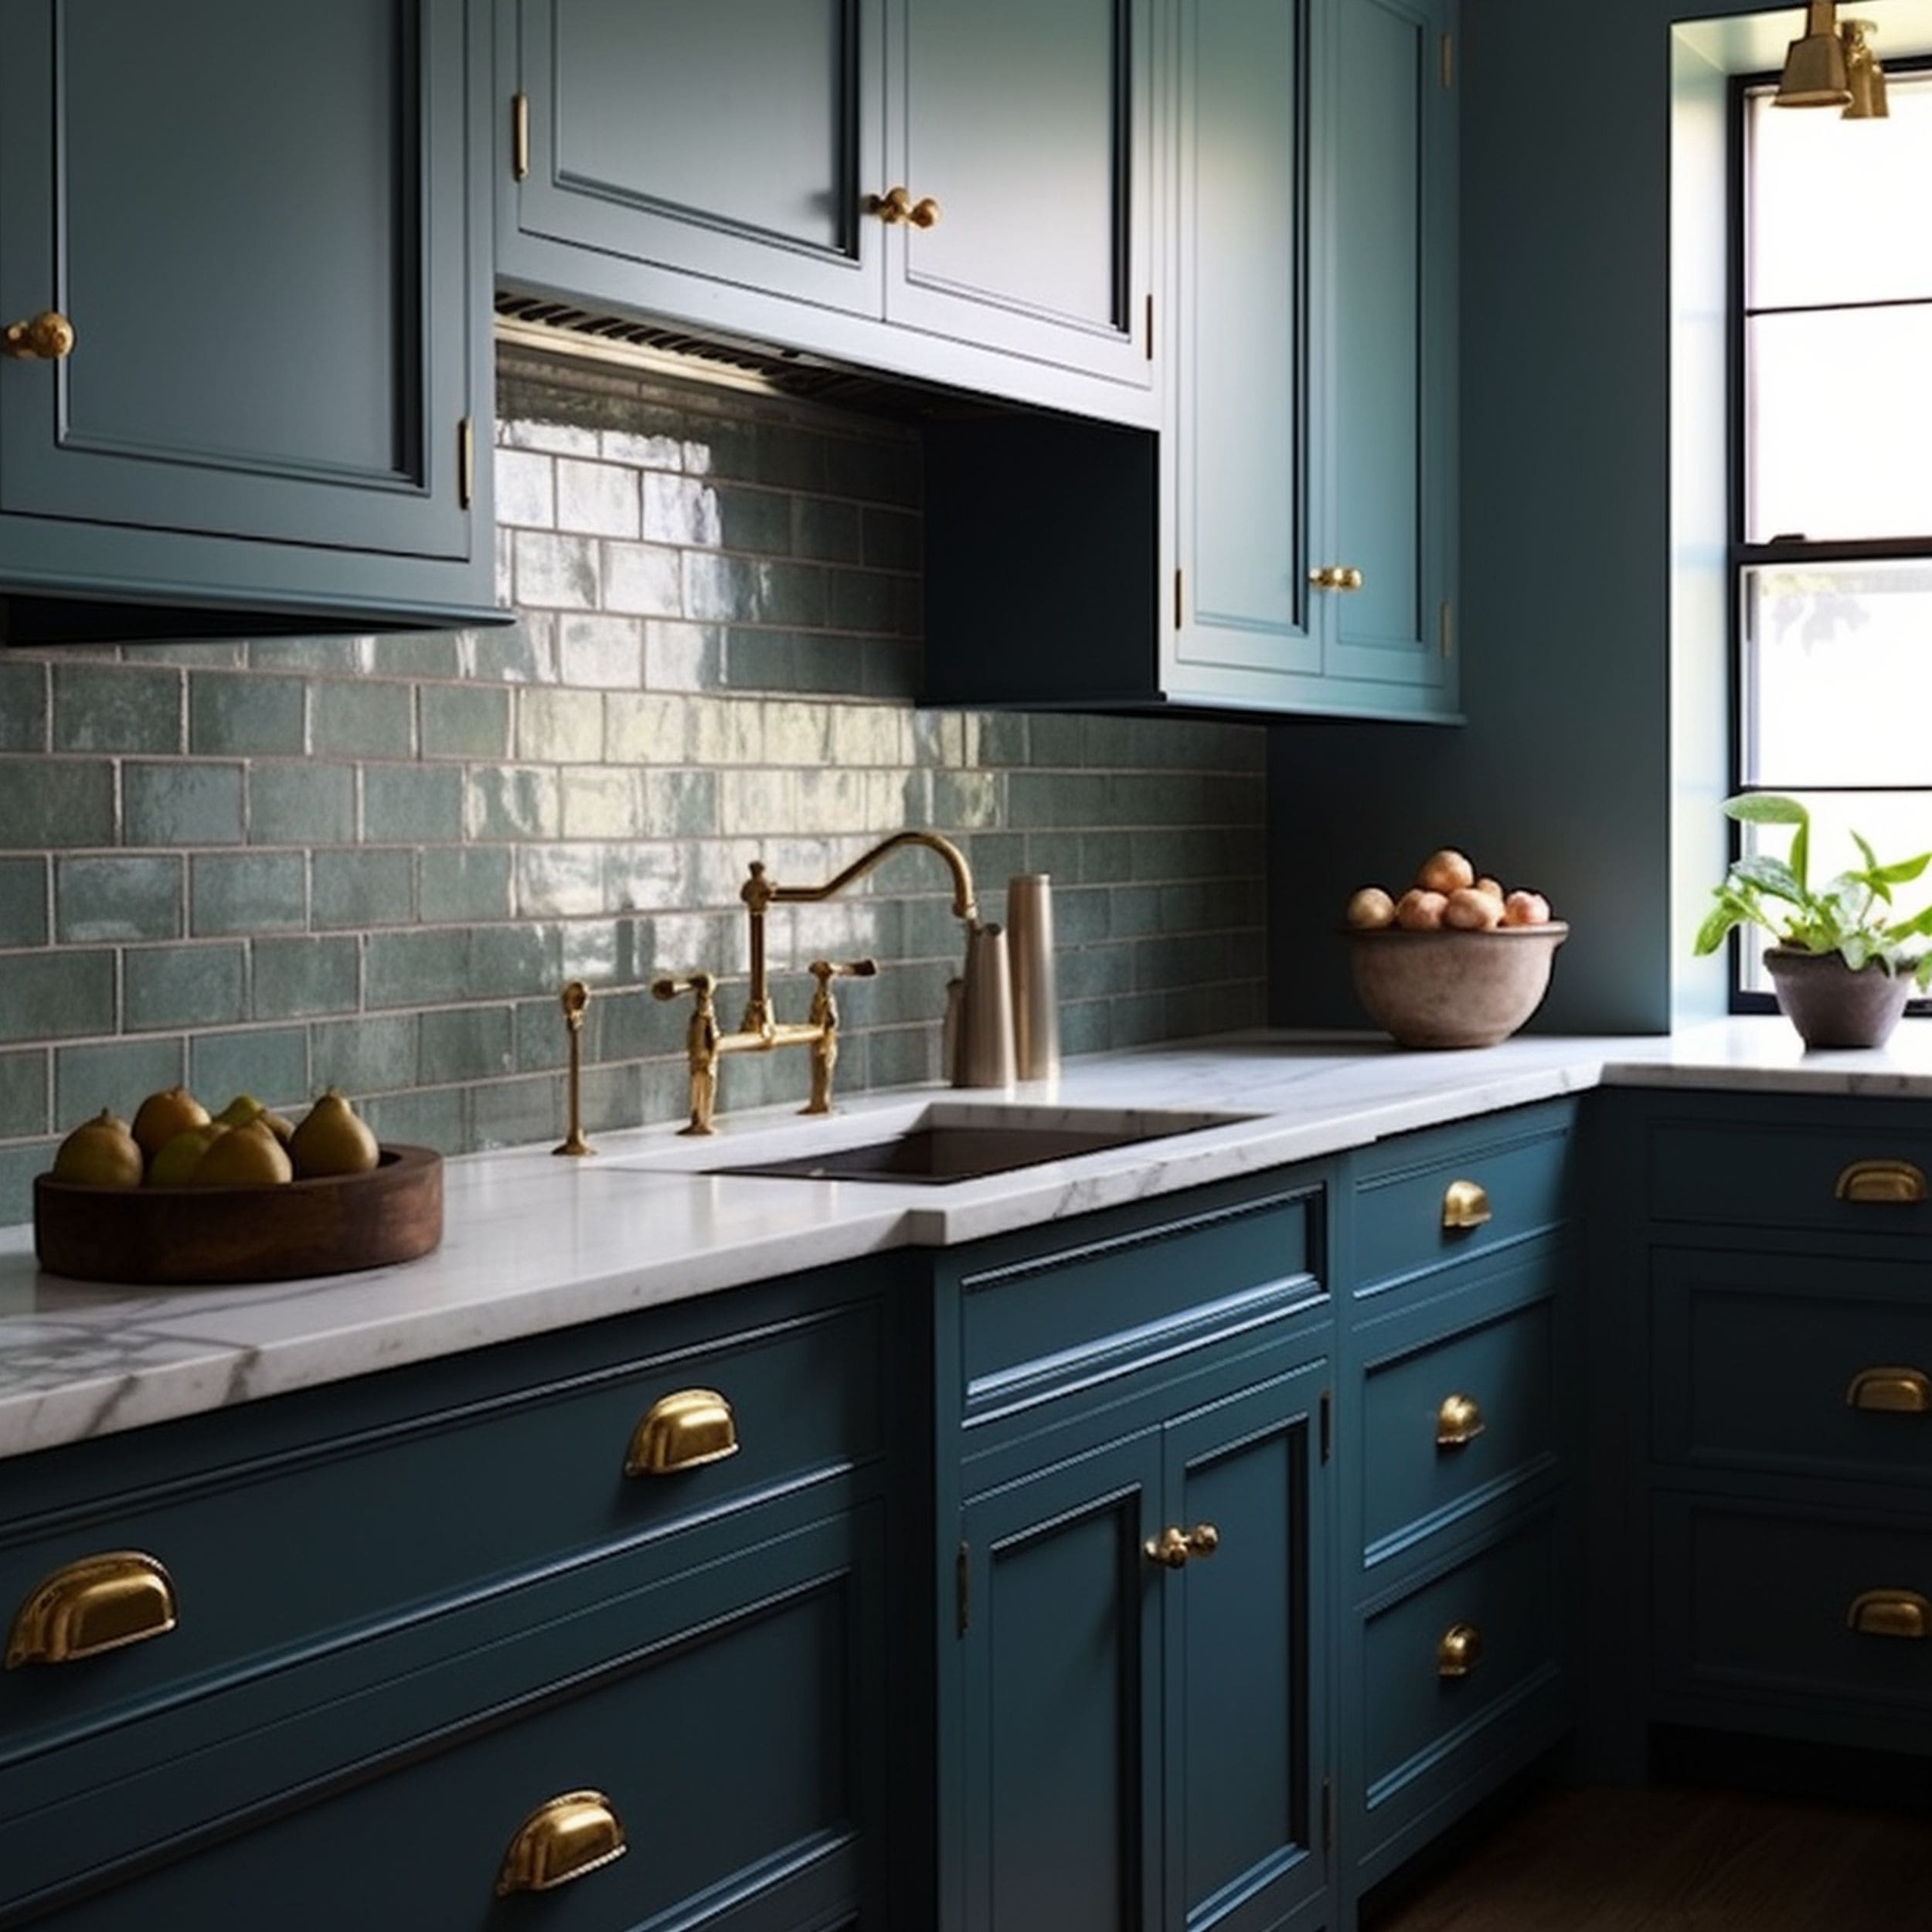 Teal Blue Kitchen With Brass Accents